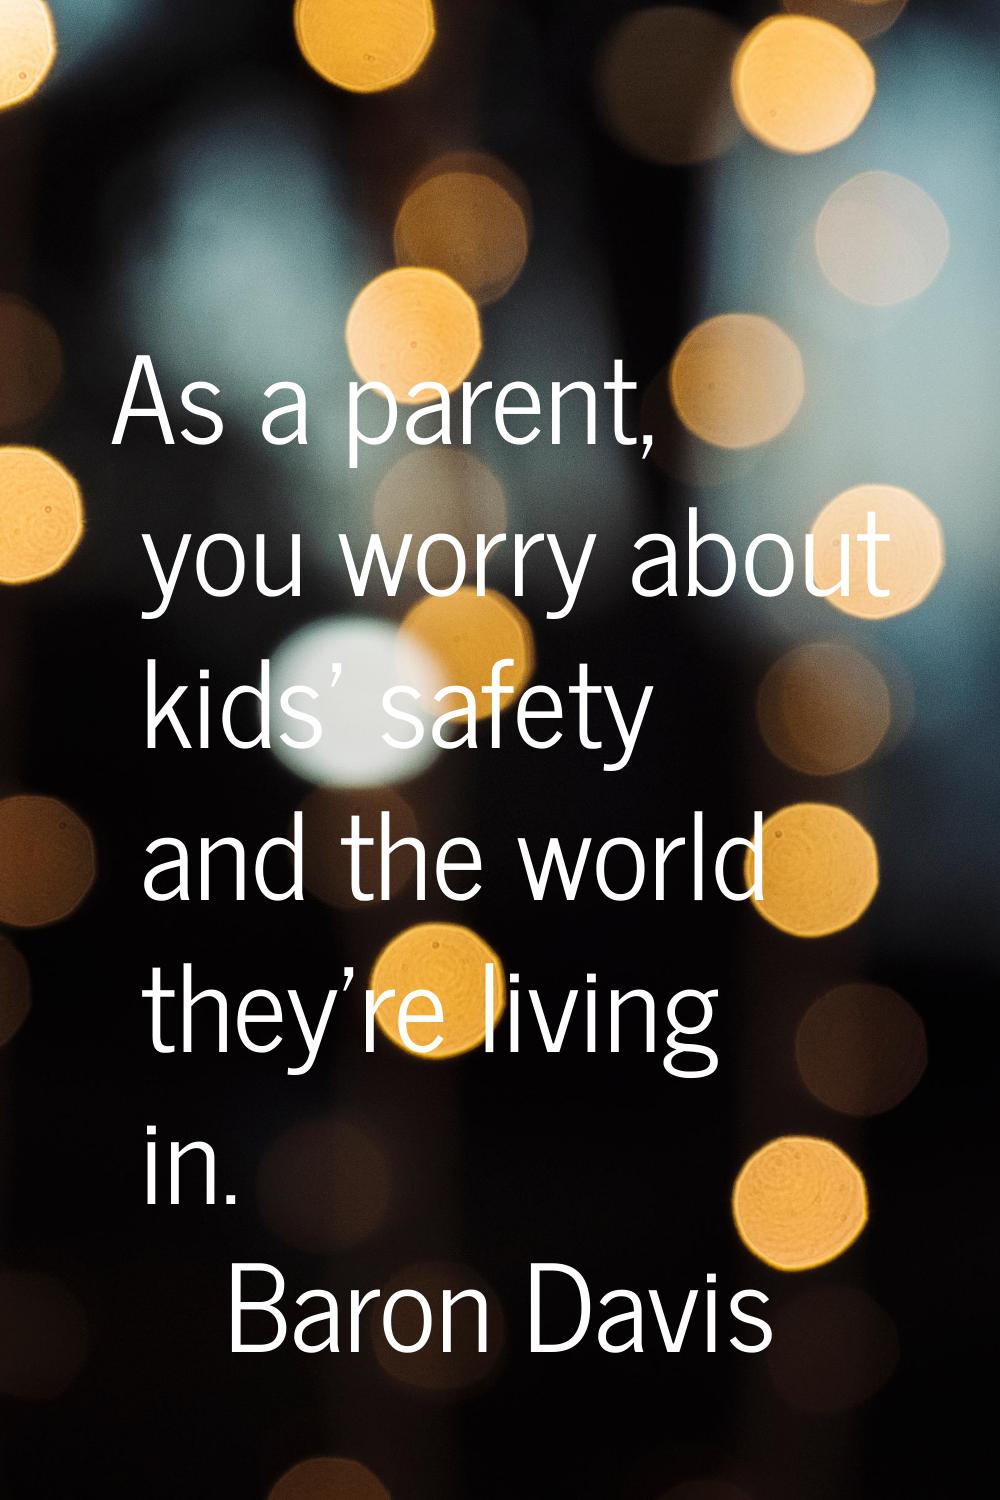 As a parent, you worry about kids' safety and the world they're living in.